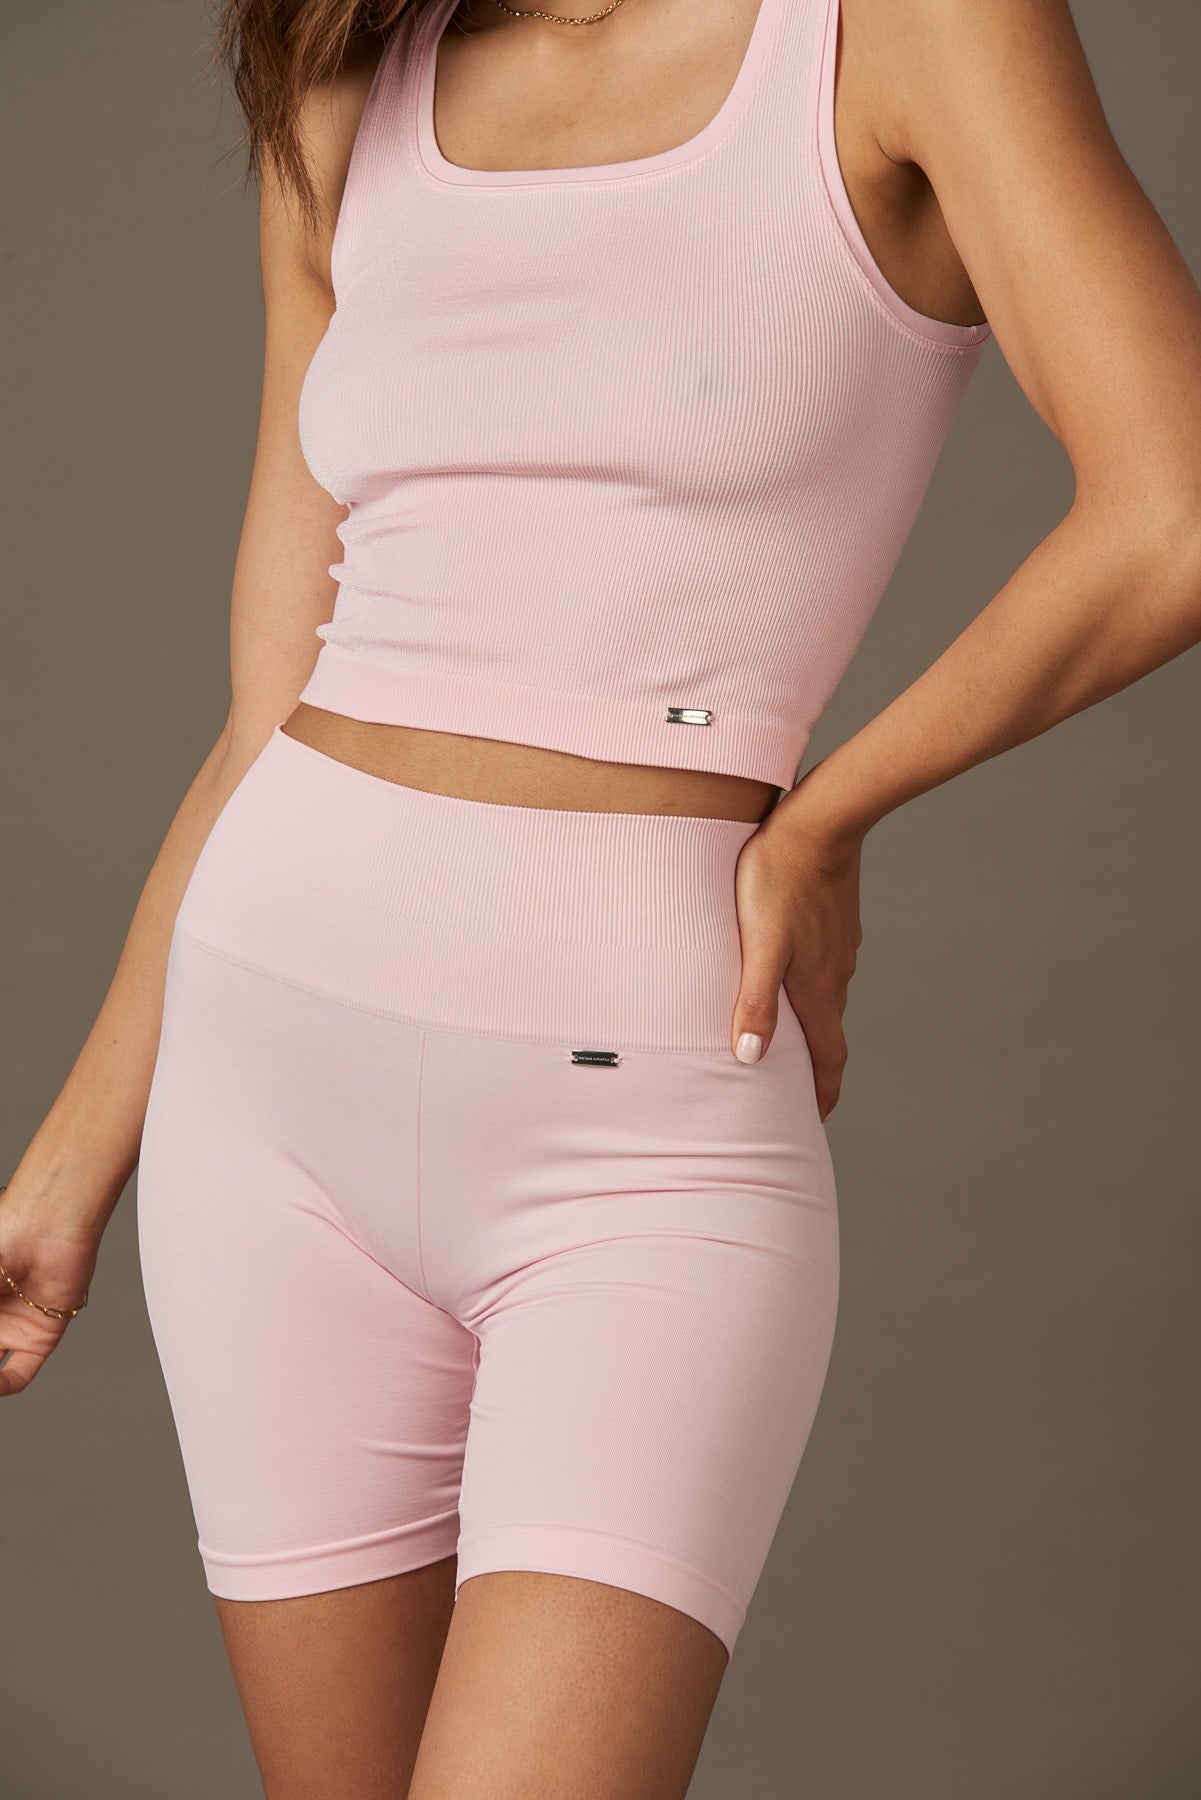 Gleam Top in Pink Ice-Tops-Shop Clothing Sustainable Recycled Yoga Leggings Women's On-line Barcelona Believe Athletics Sustainable Recycled Yoga Clothes